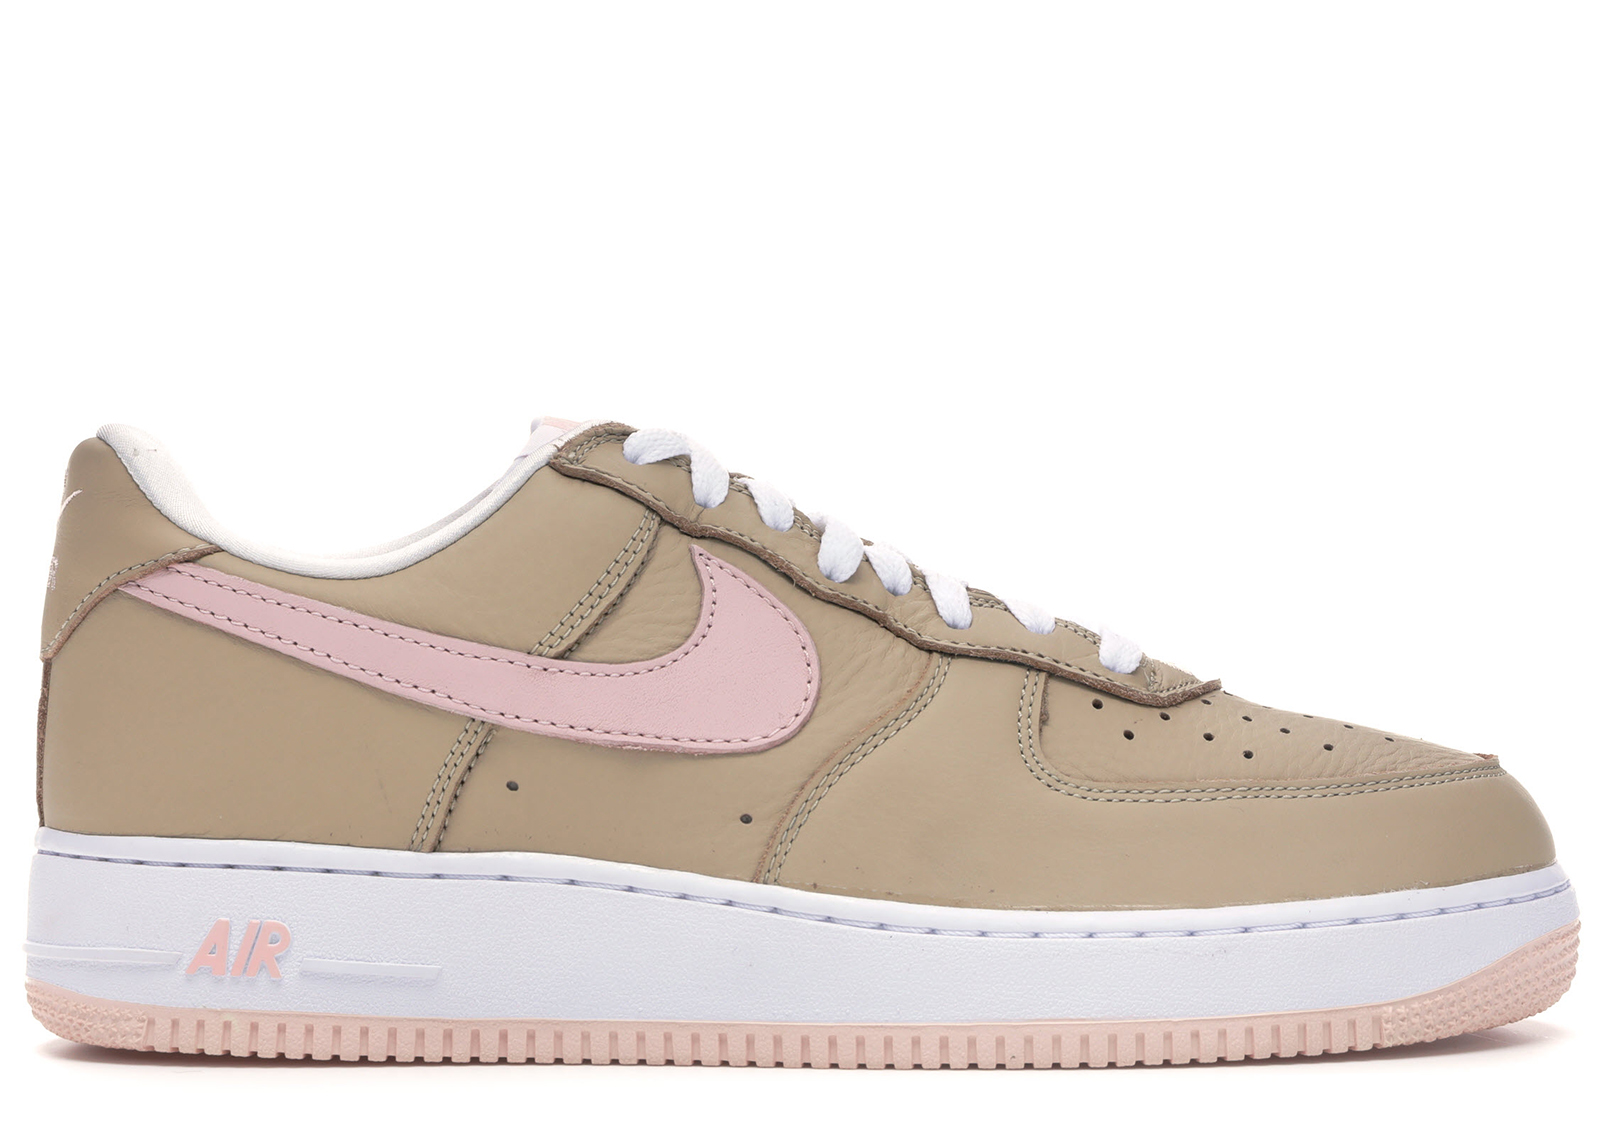 Nike Air Force 1 Low Linen Kith Exclusive - 845053-201 - US